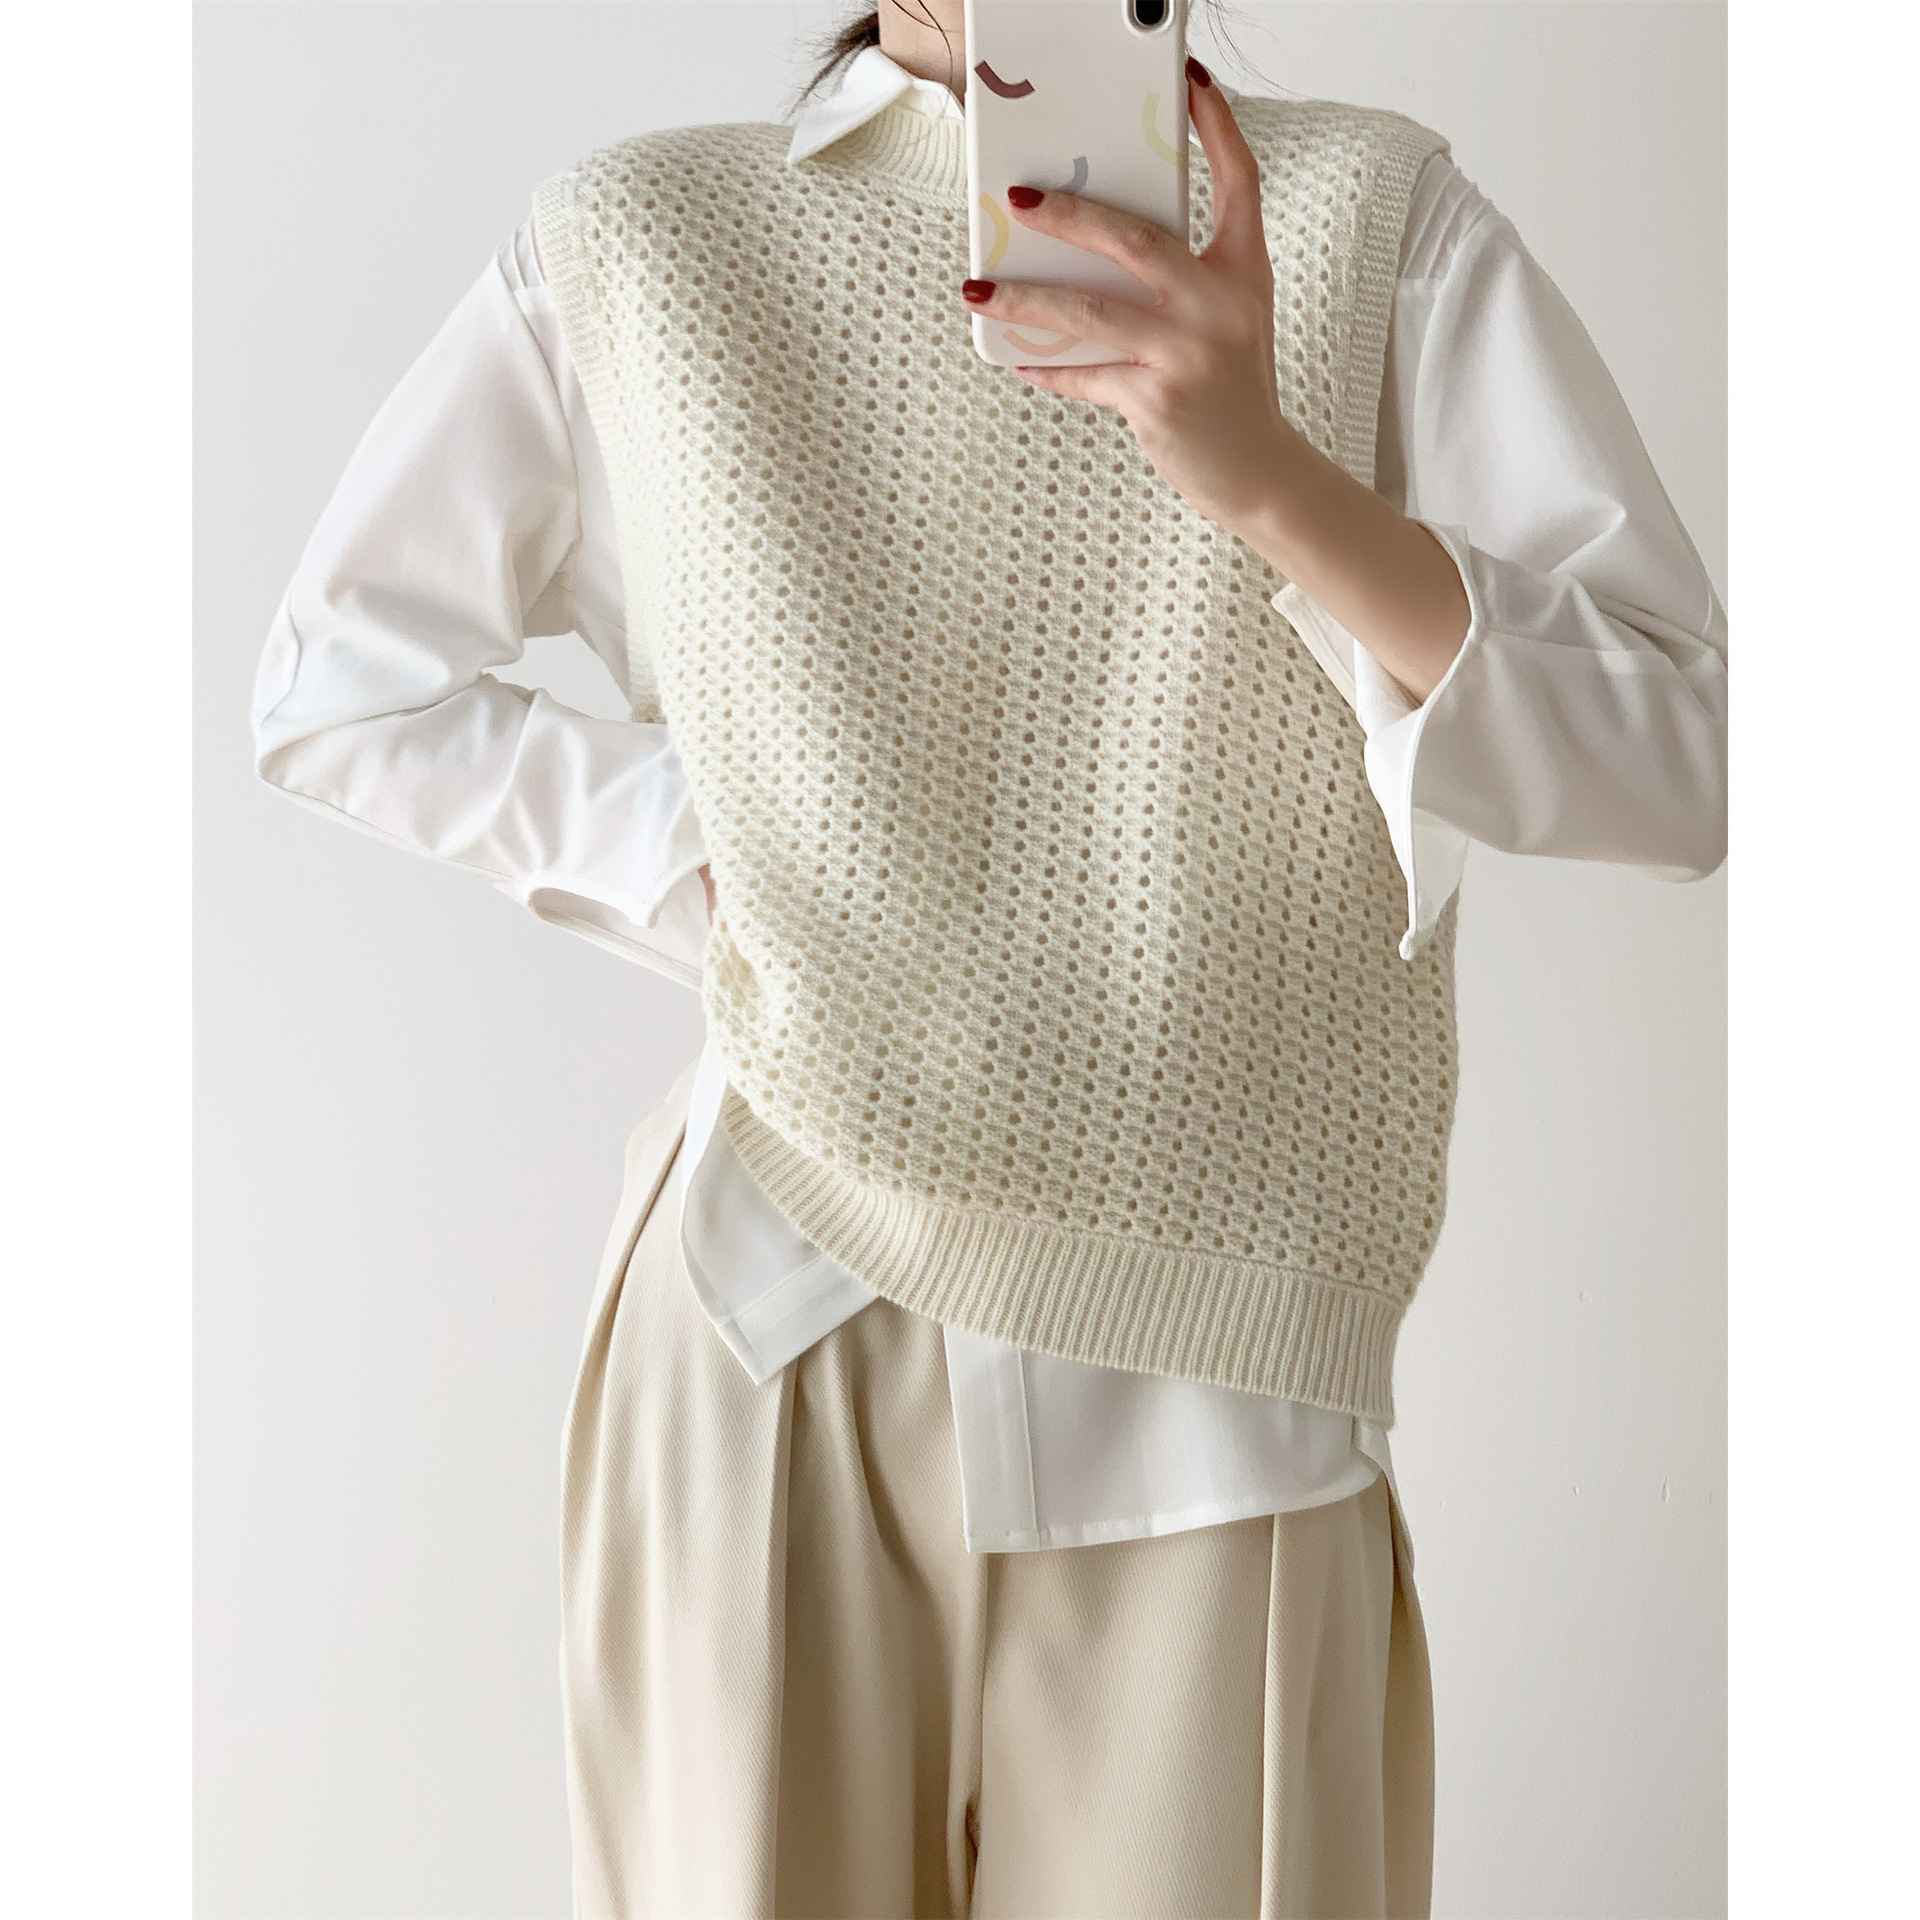 BTS Taehyung Inspired White Knitted Pullover – unnielooks